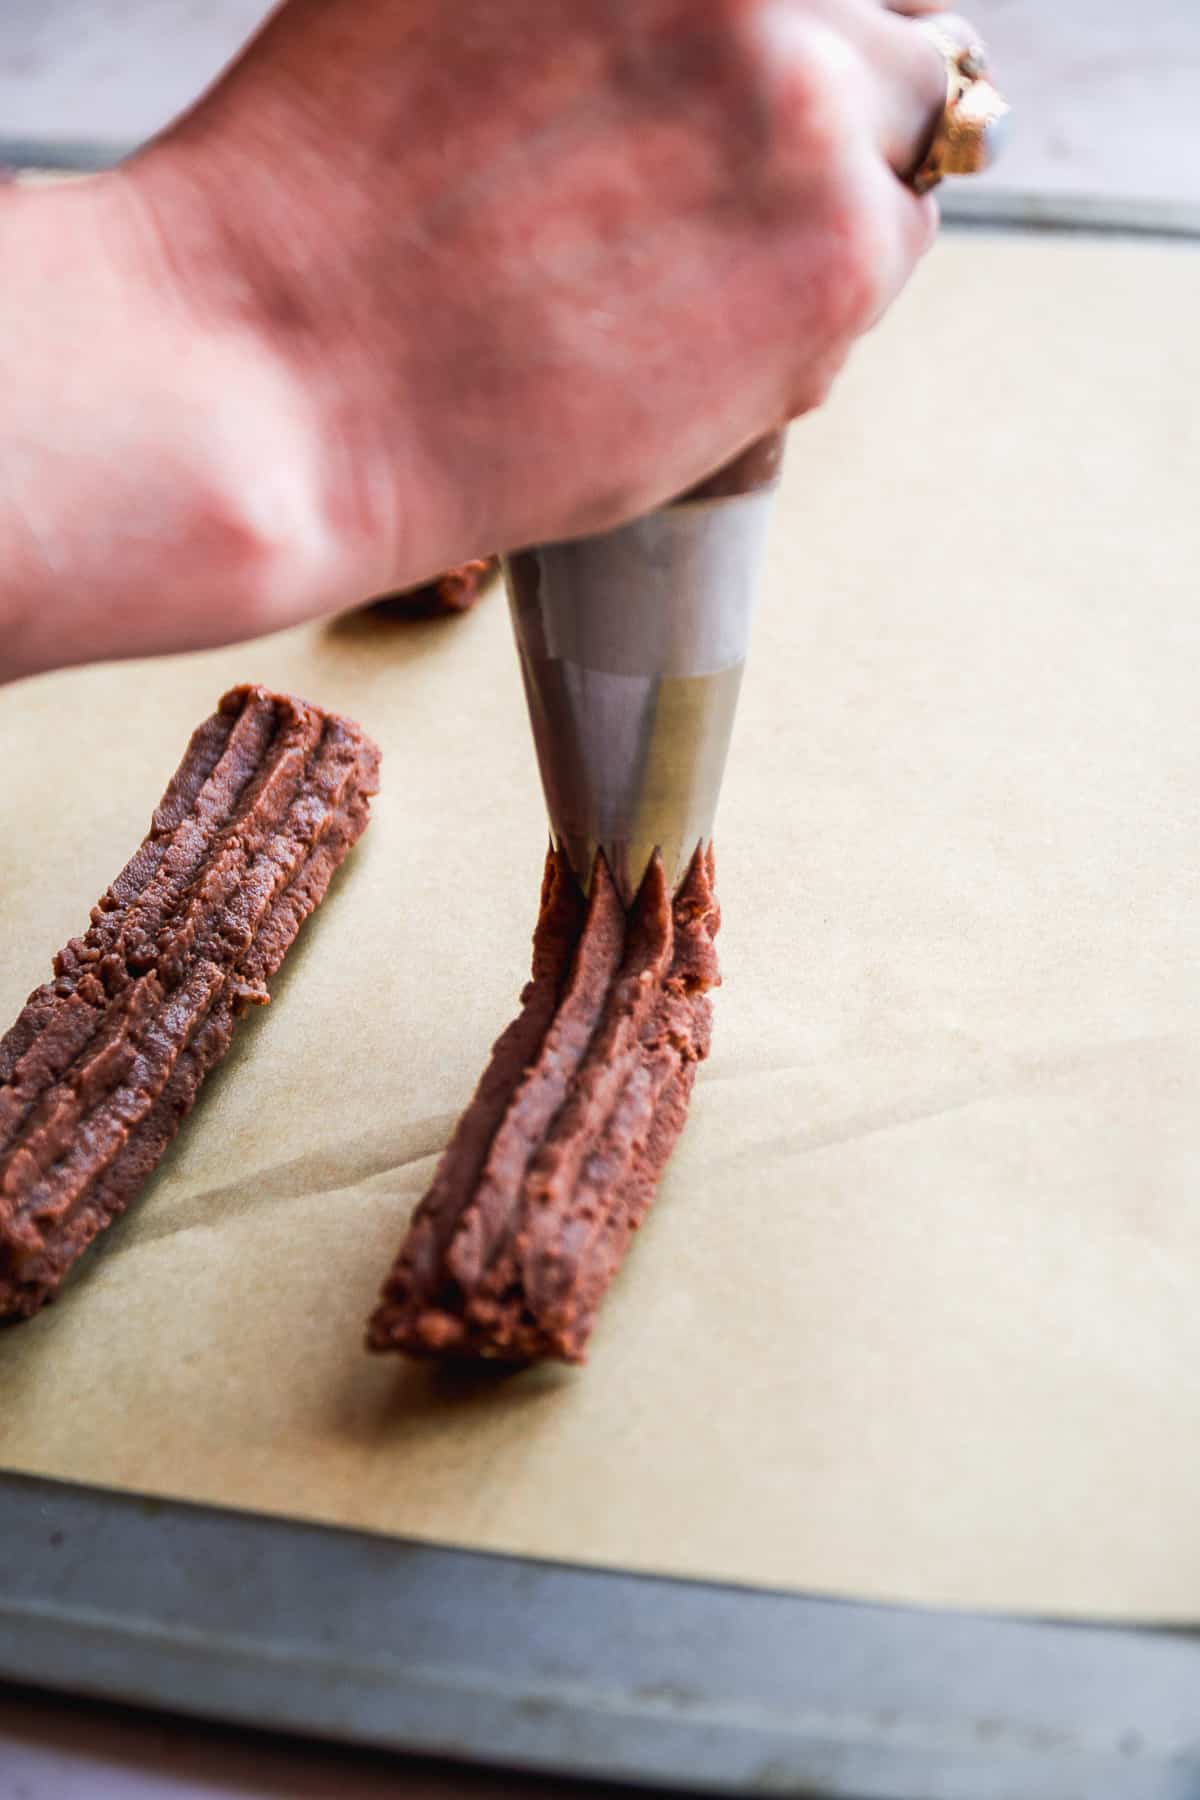 Person piping a churro onto a baking sheet with parchment paper.